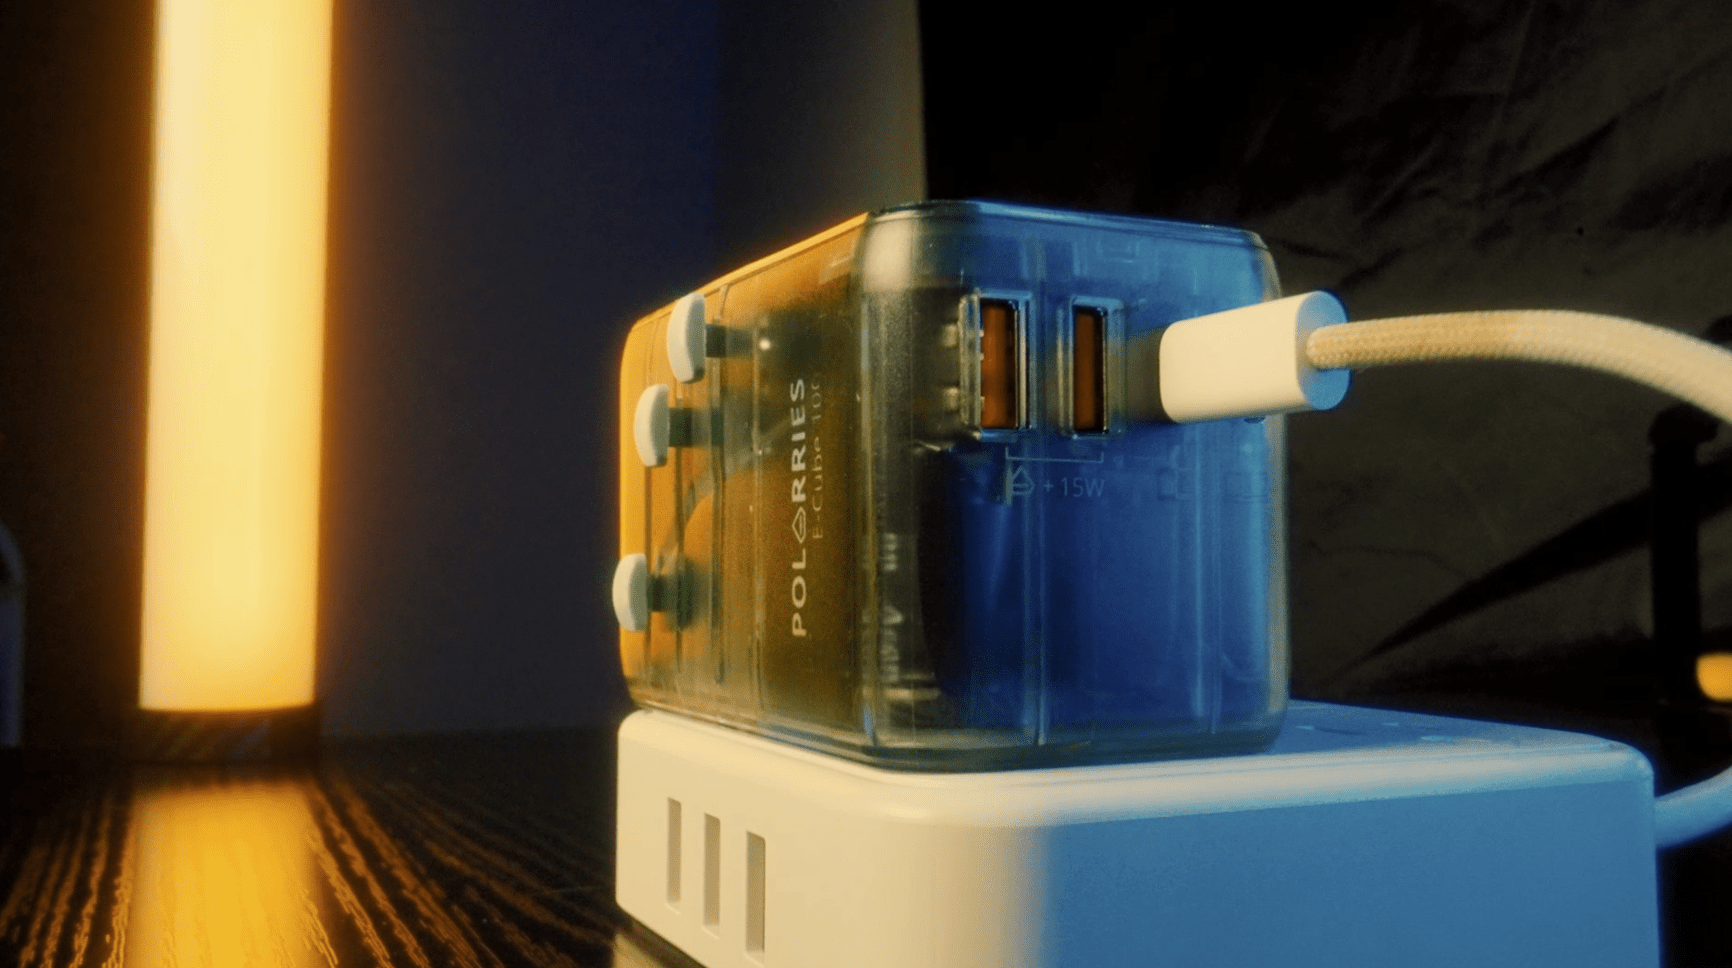 A Superfast 100W Travel Adapter – POLARRIES E-Cube 100 Review